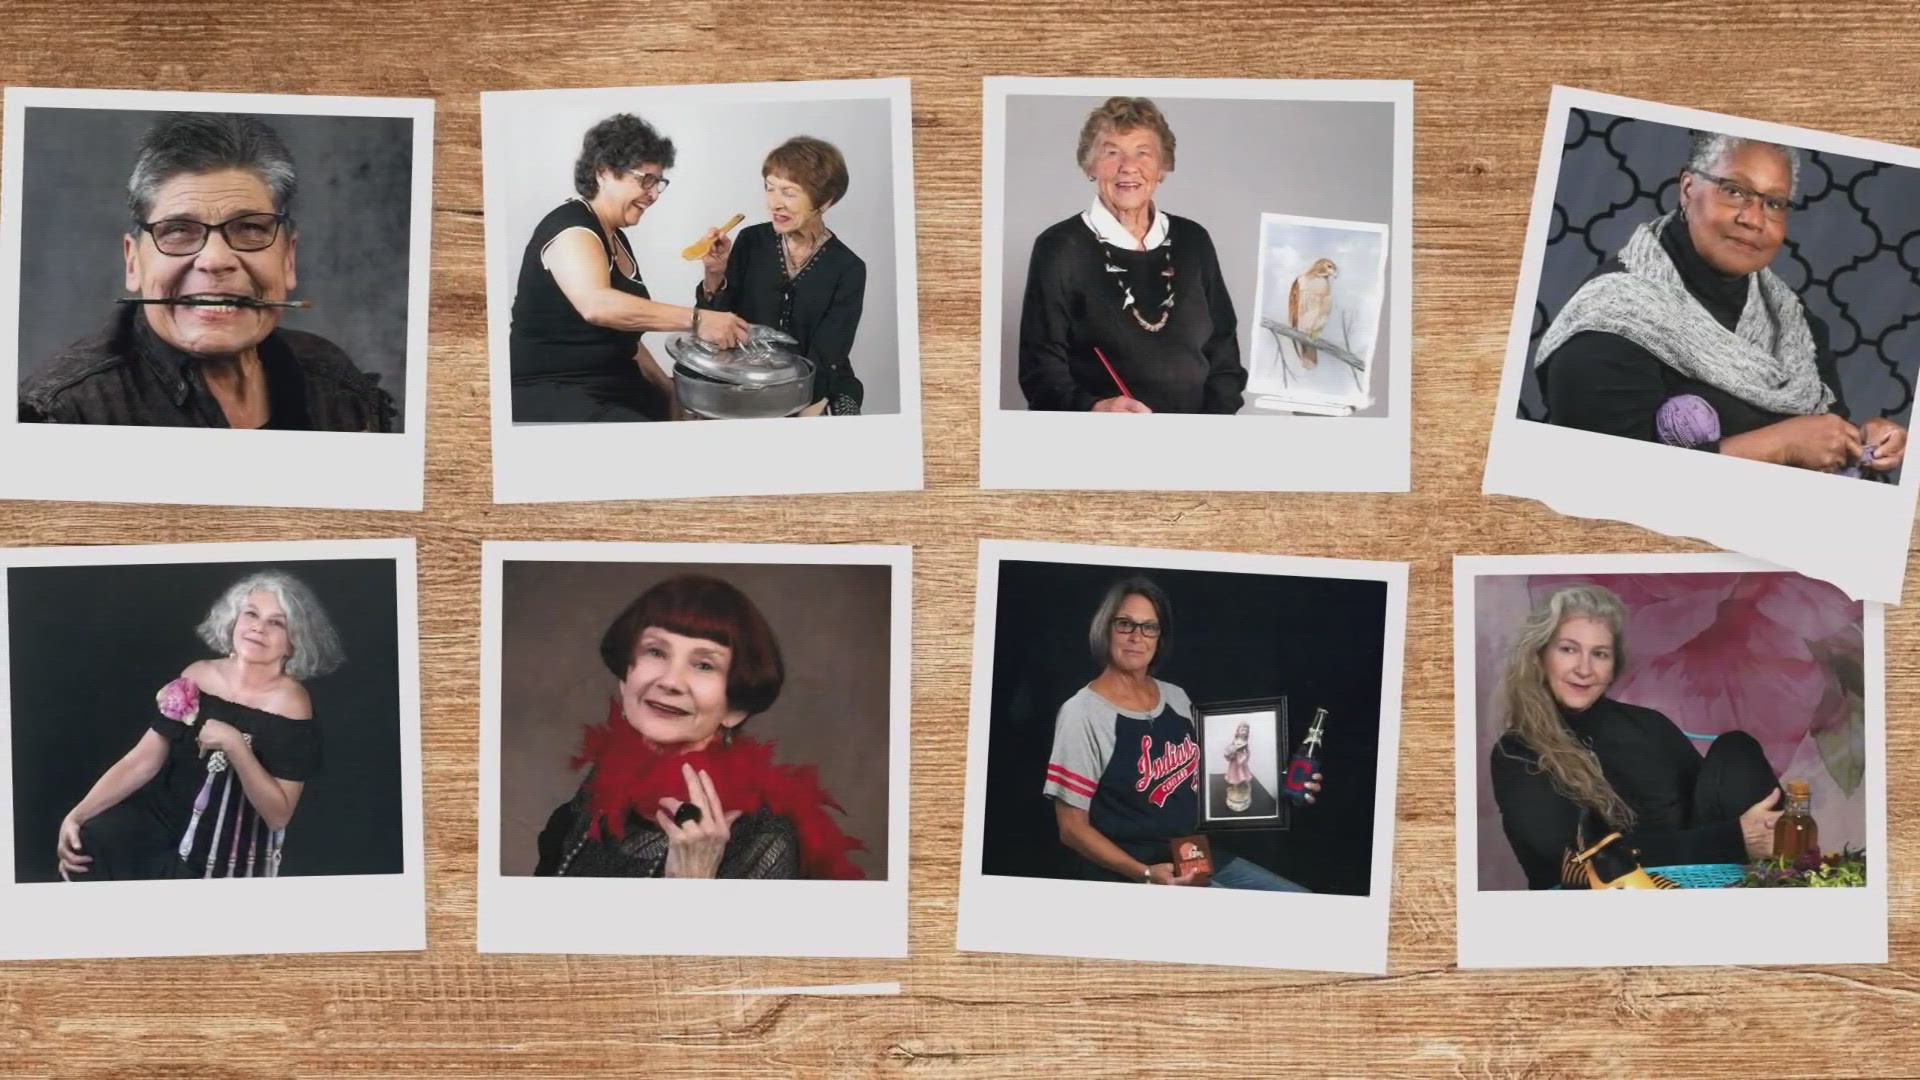 Pennington's book 'Extraordinary Women from an Ordinary Place' features photographs of more than 50 senior women from Northeast Ohio.